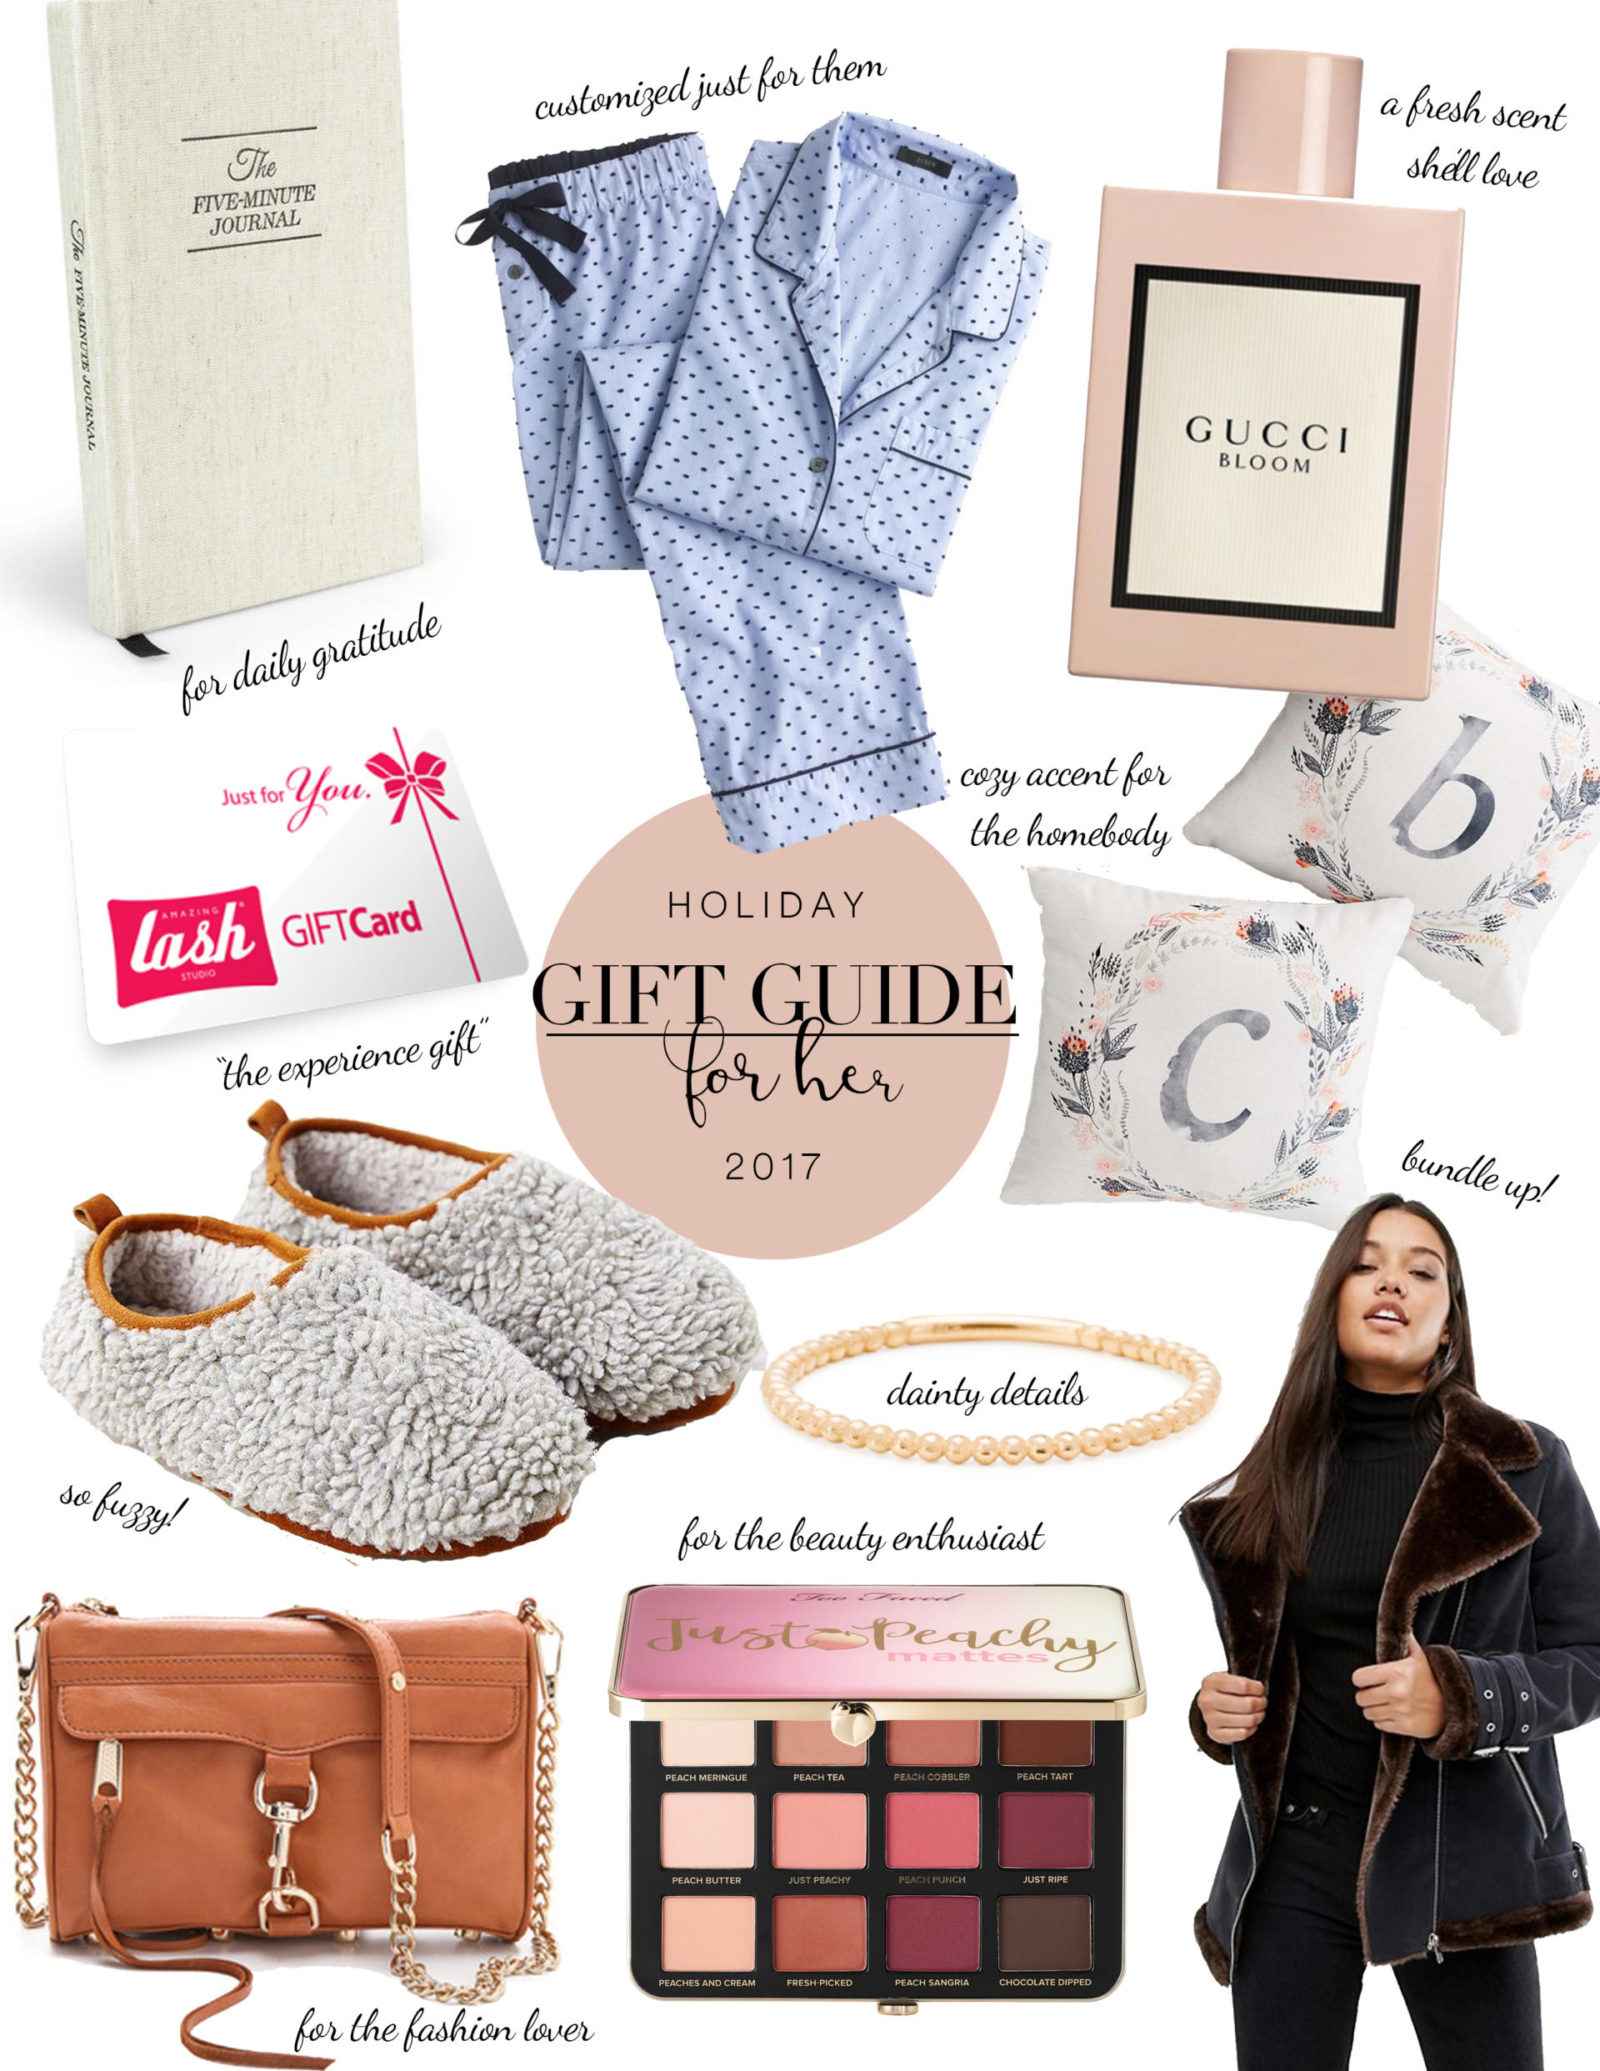 Holiday Gift Guide For Her 2017